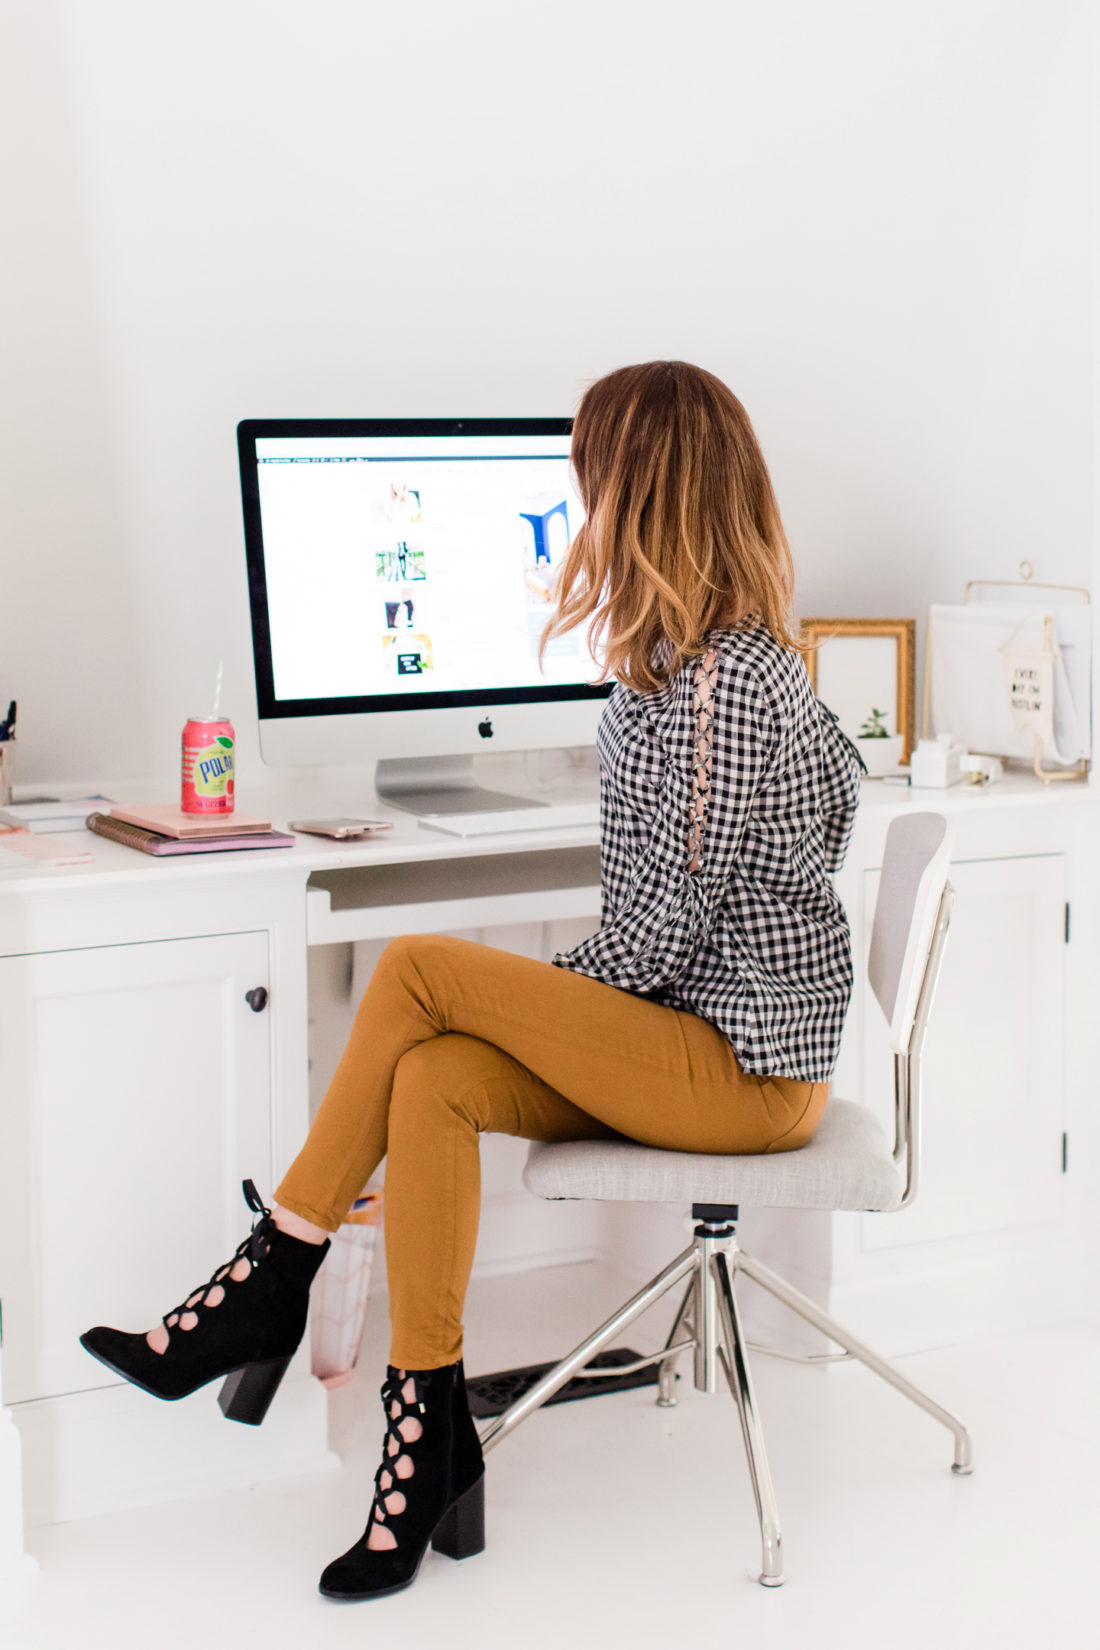 Eva Amurri Martino wears tan jeans and a black and white checked top, and sits at her computer in the Happily Eva After studio